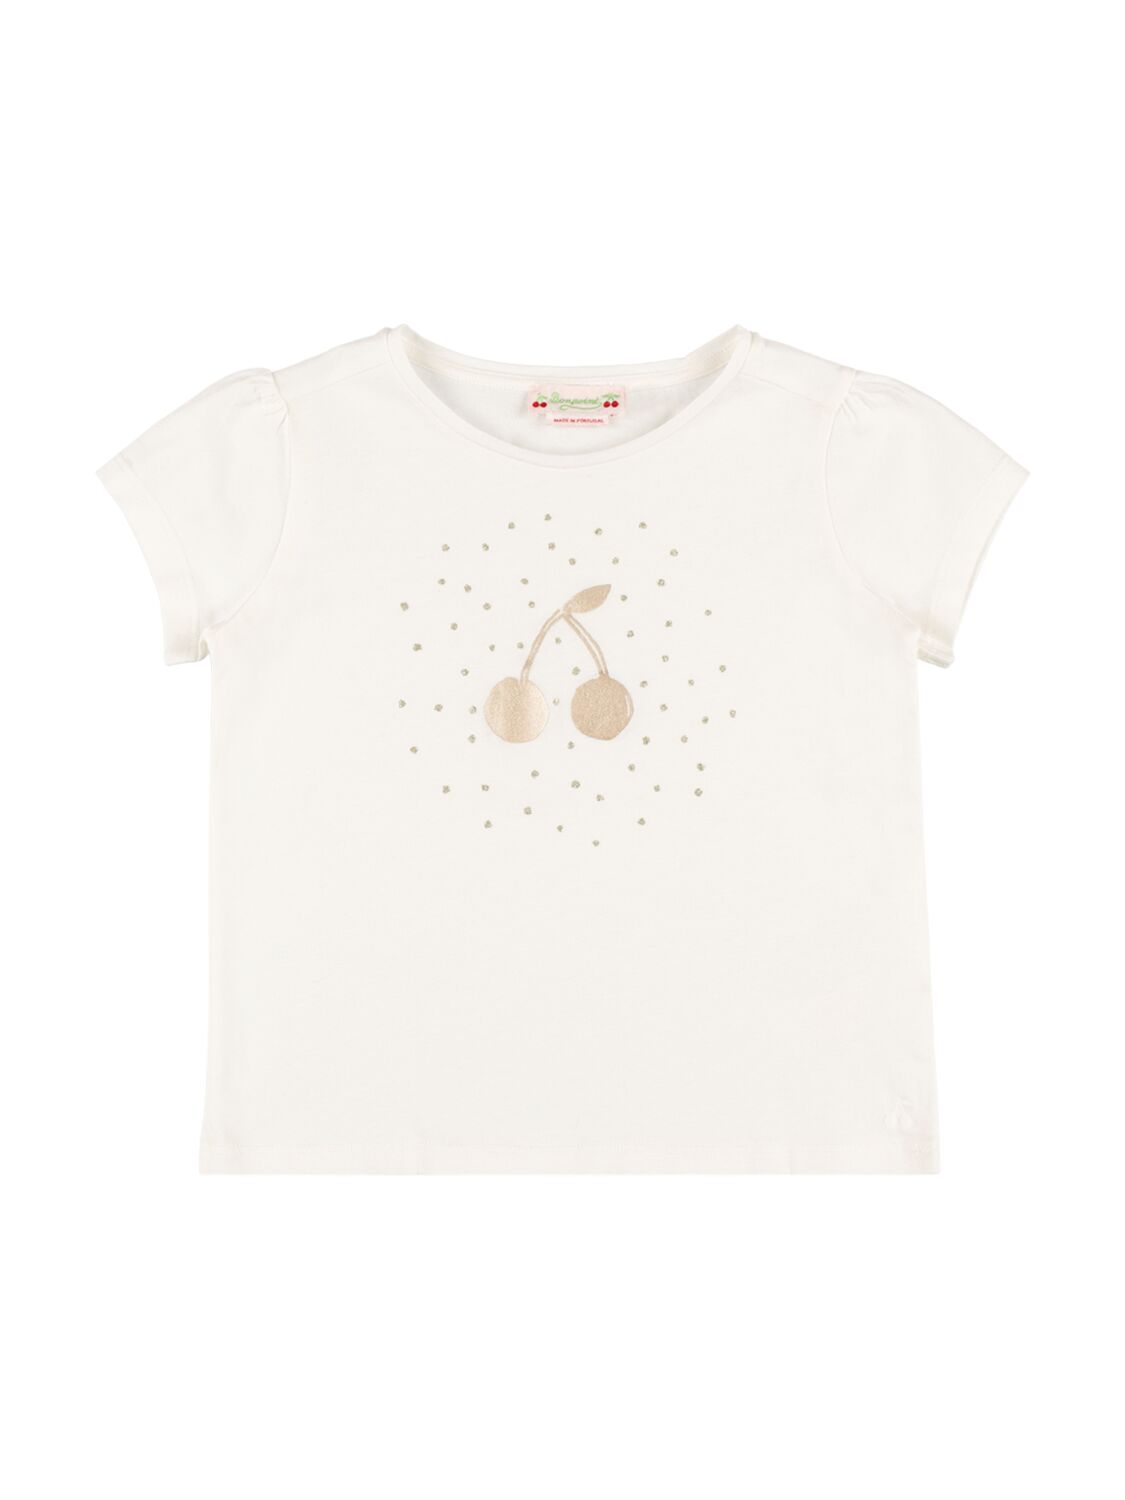 Bonpoint Kids' Printed Cotton Jersey T-shirt In White